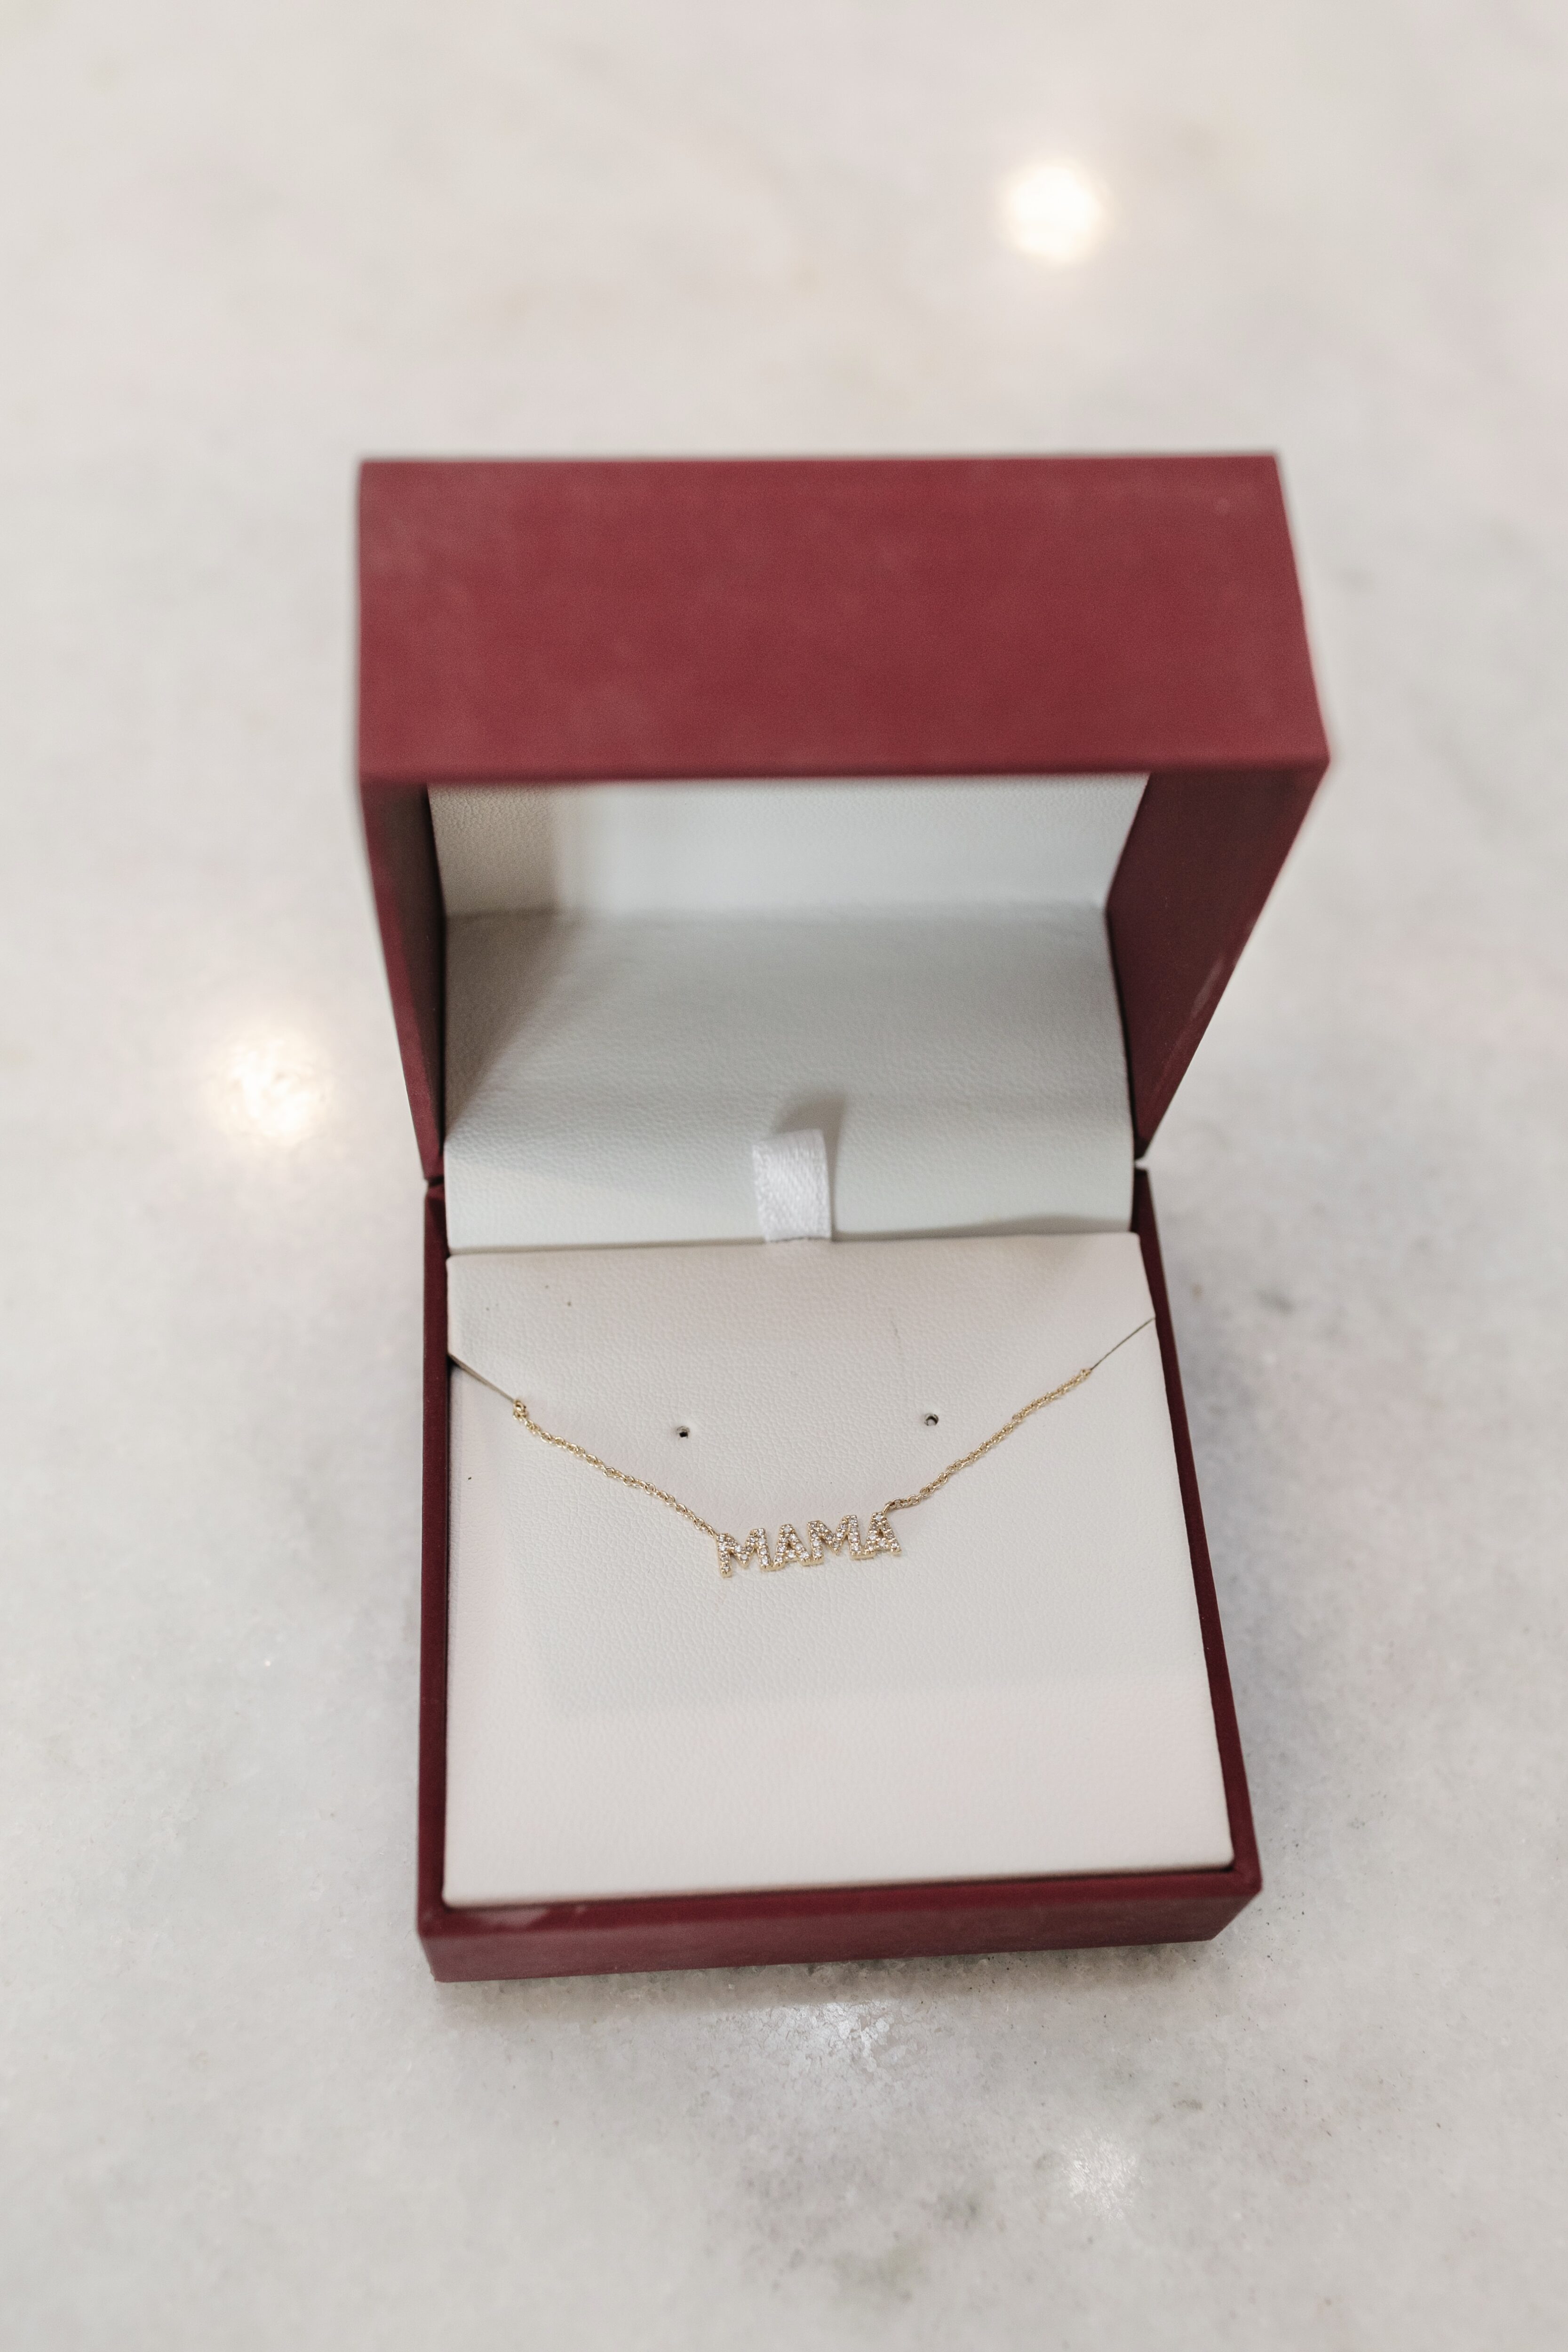 Mother's Day gift: MAMA necklace, necklace for mom